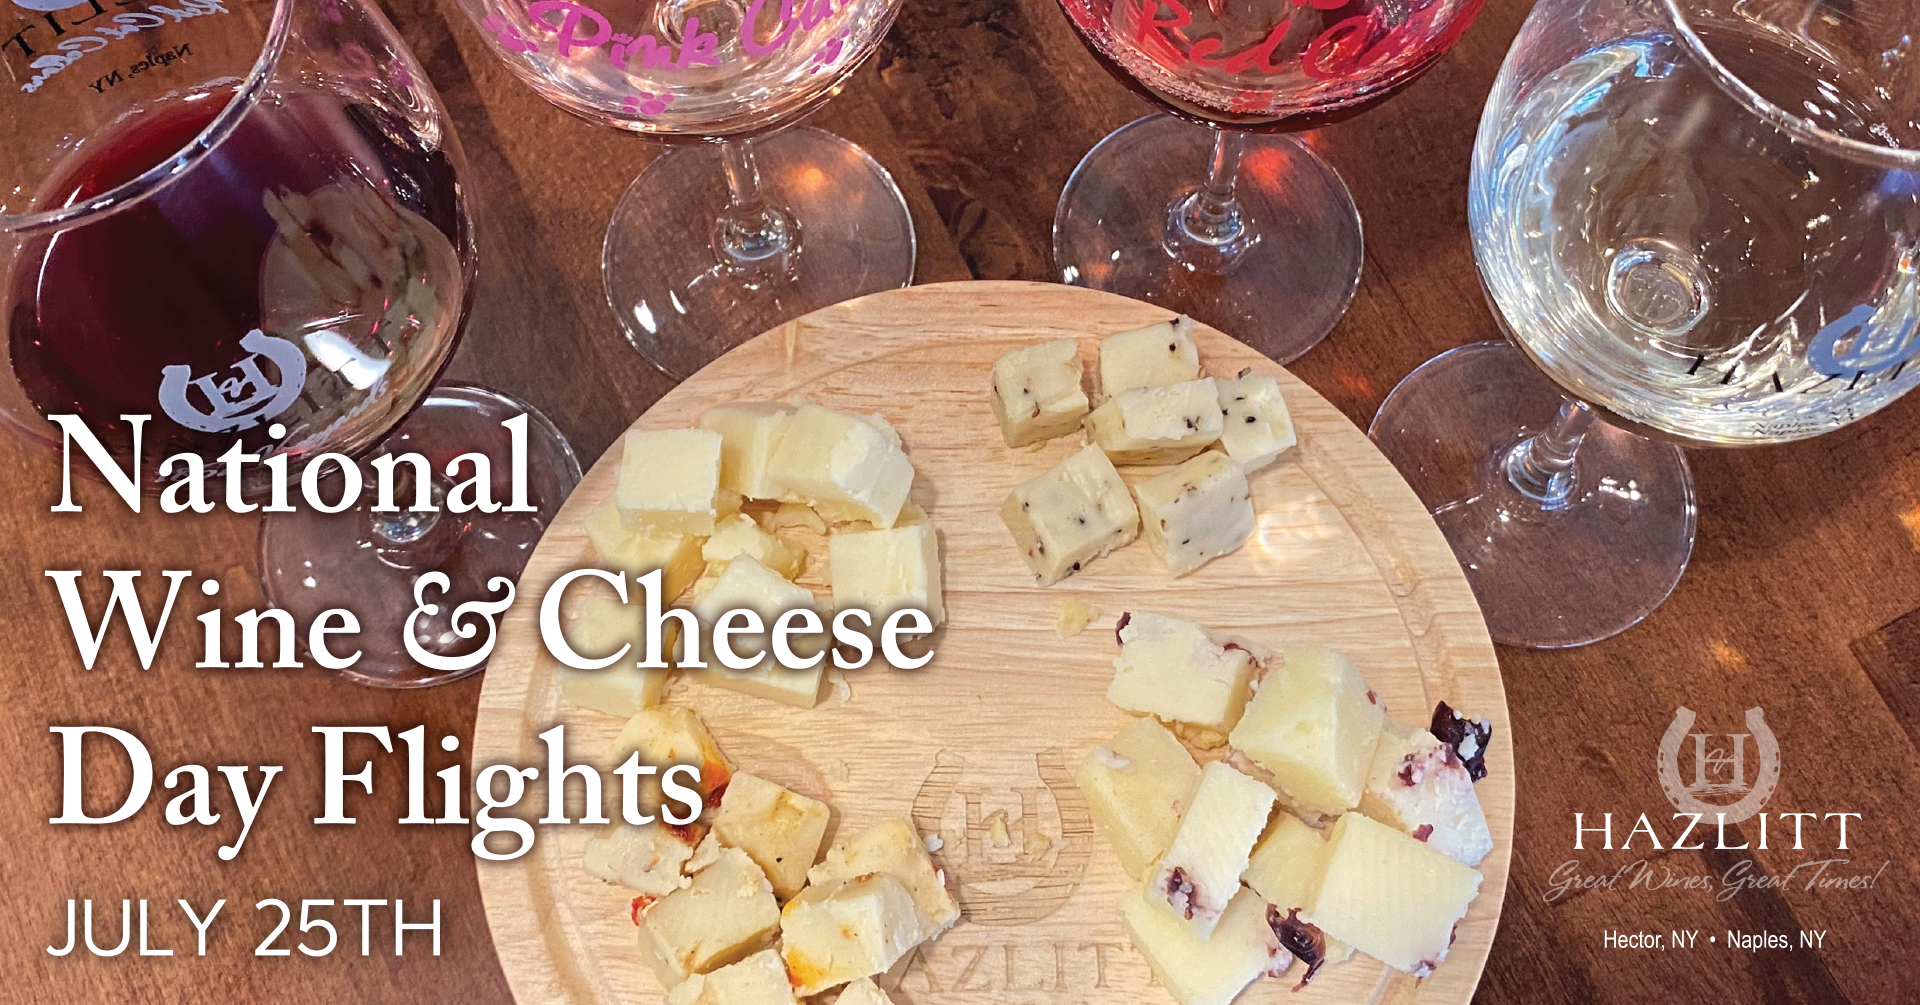 National Wine & Cheese Day Flights July 25th